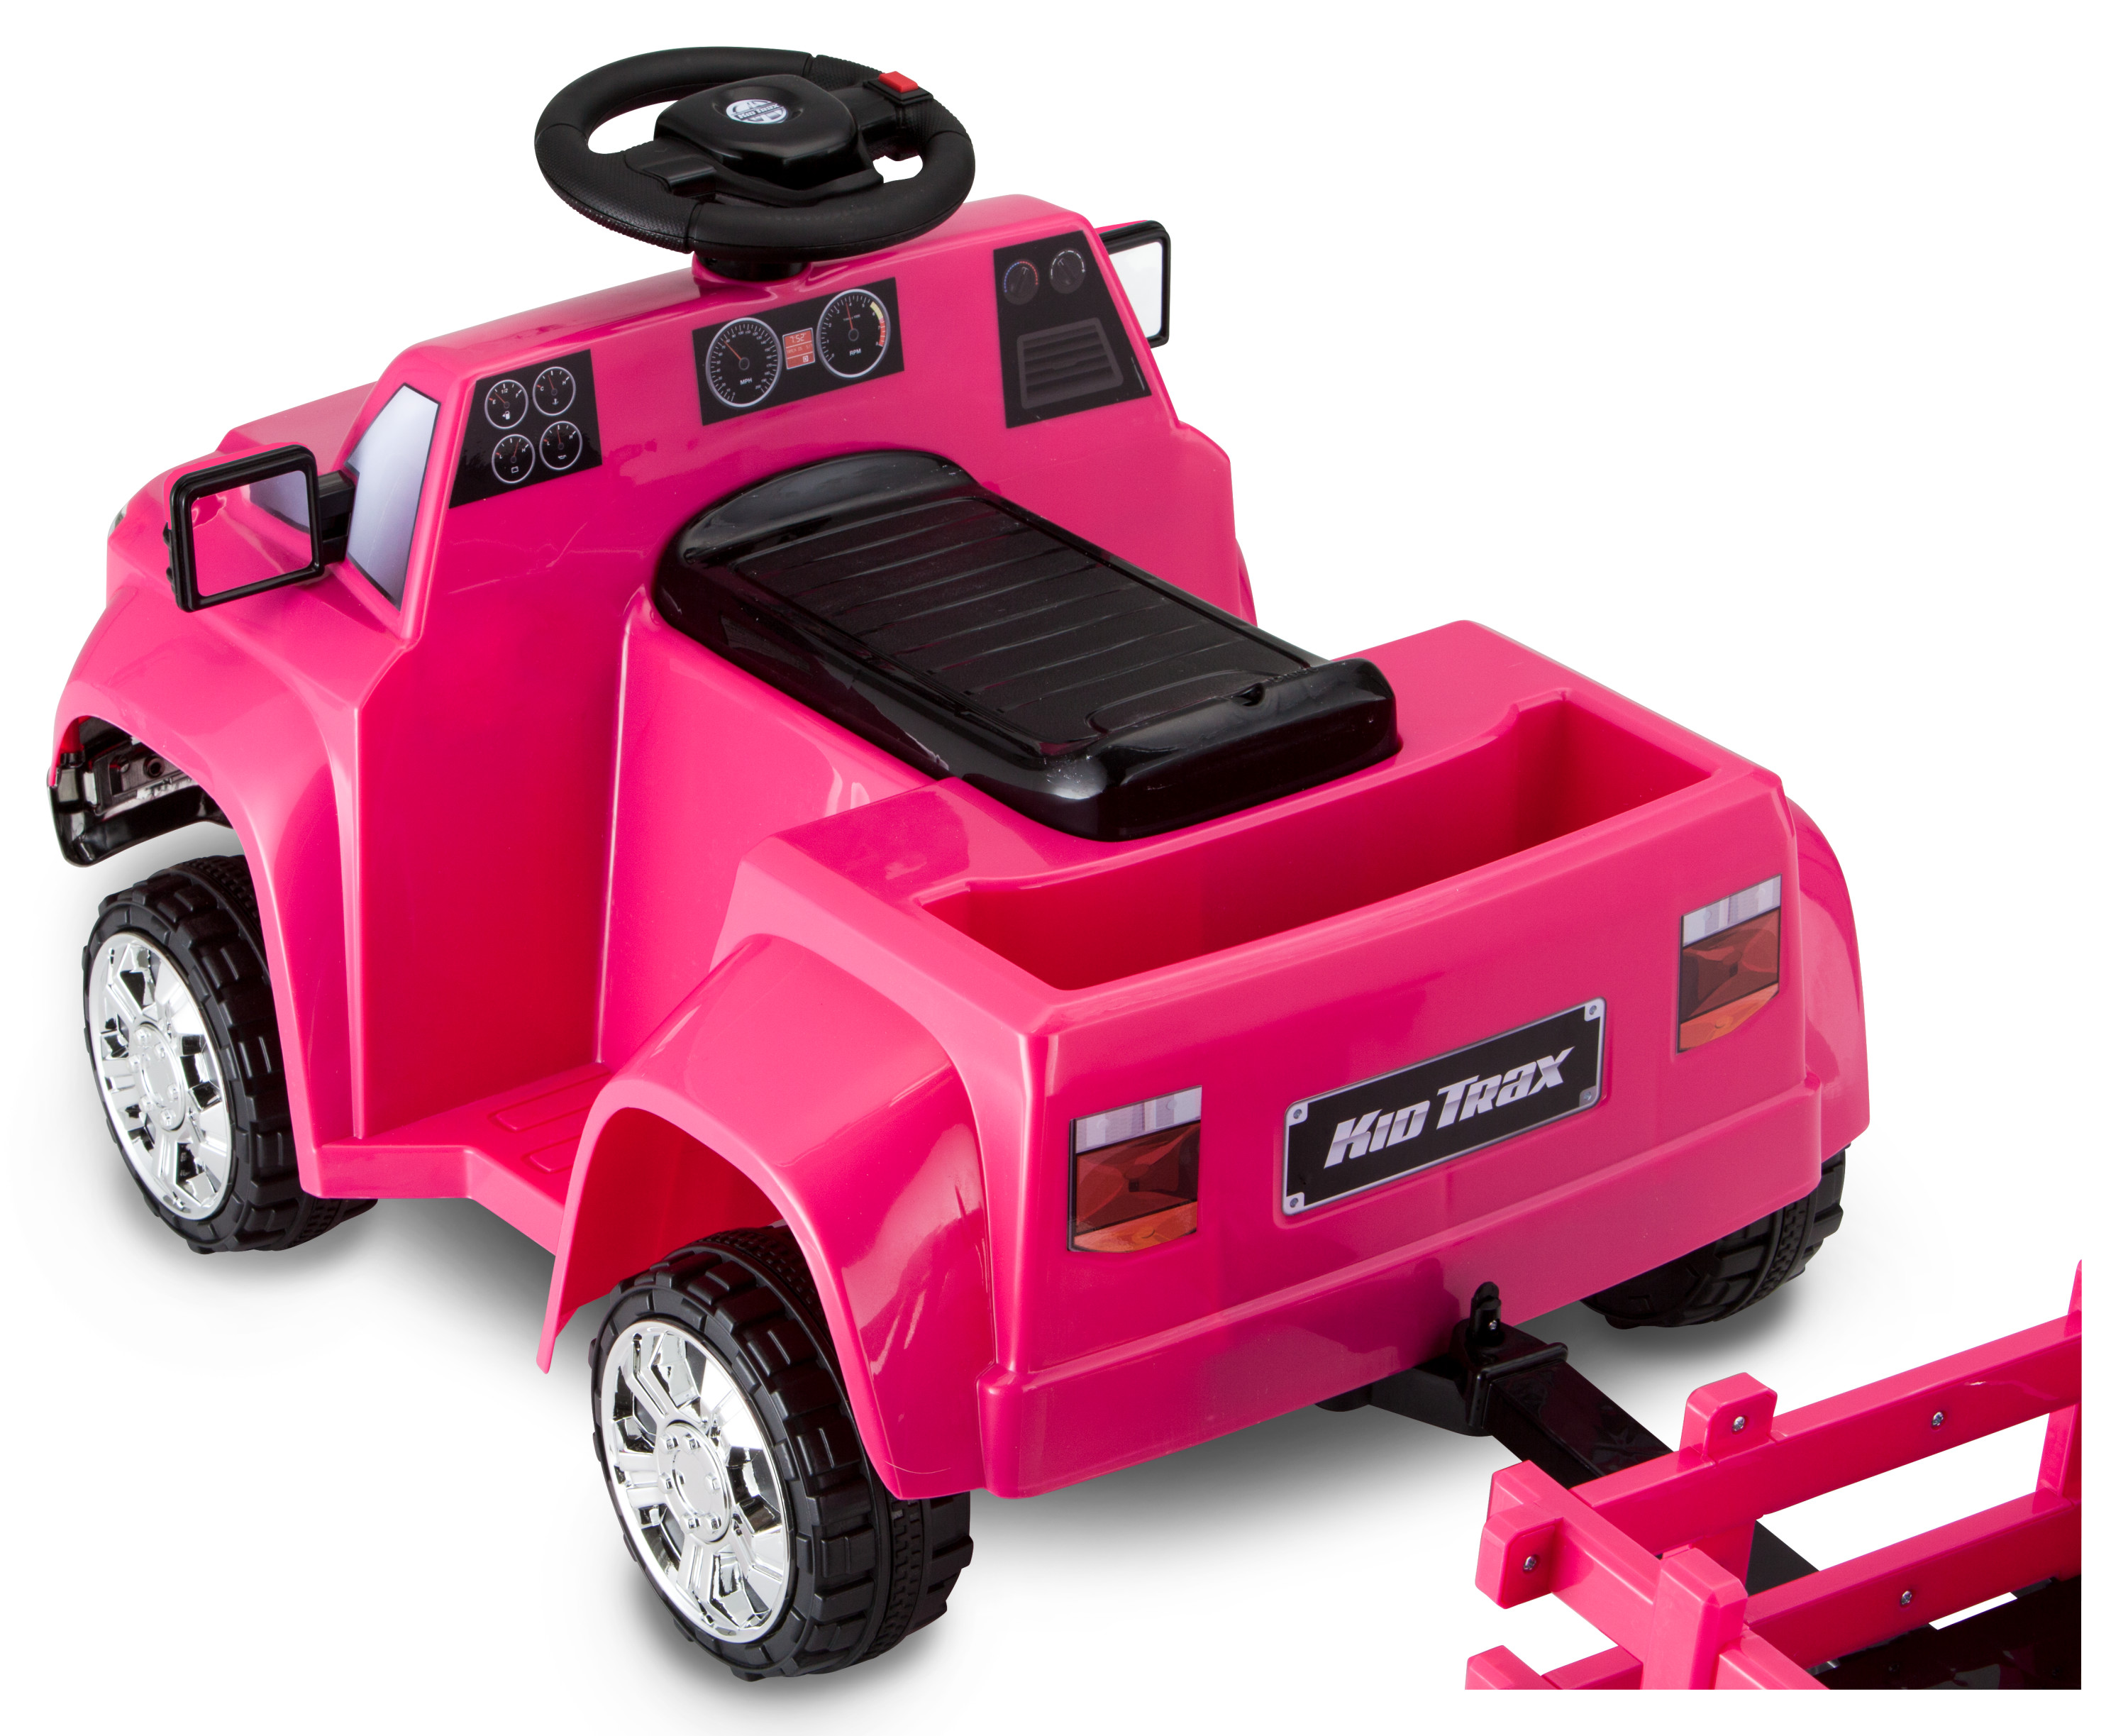 Heavy Hauling Truck with Trailer Toddler Ride-On Toy by Kid Trax, pink - image 4 of 8